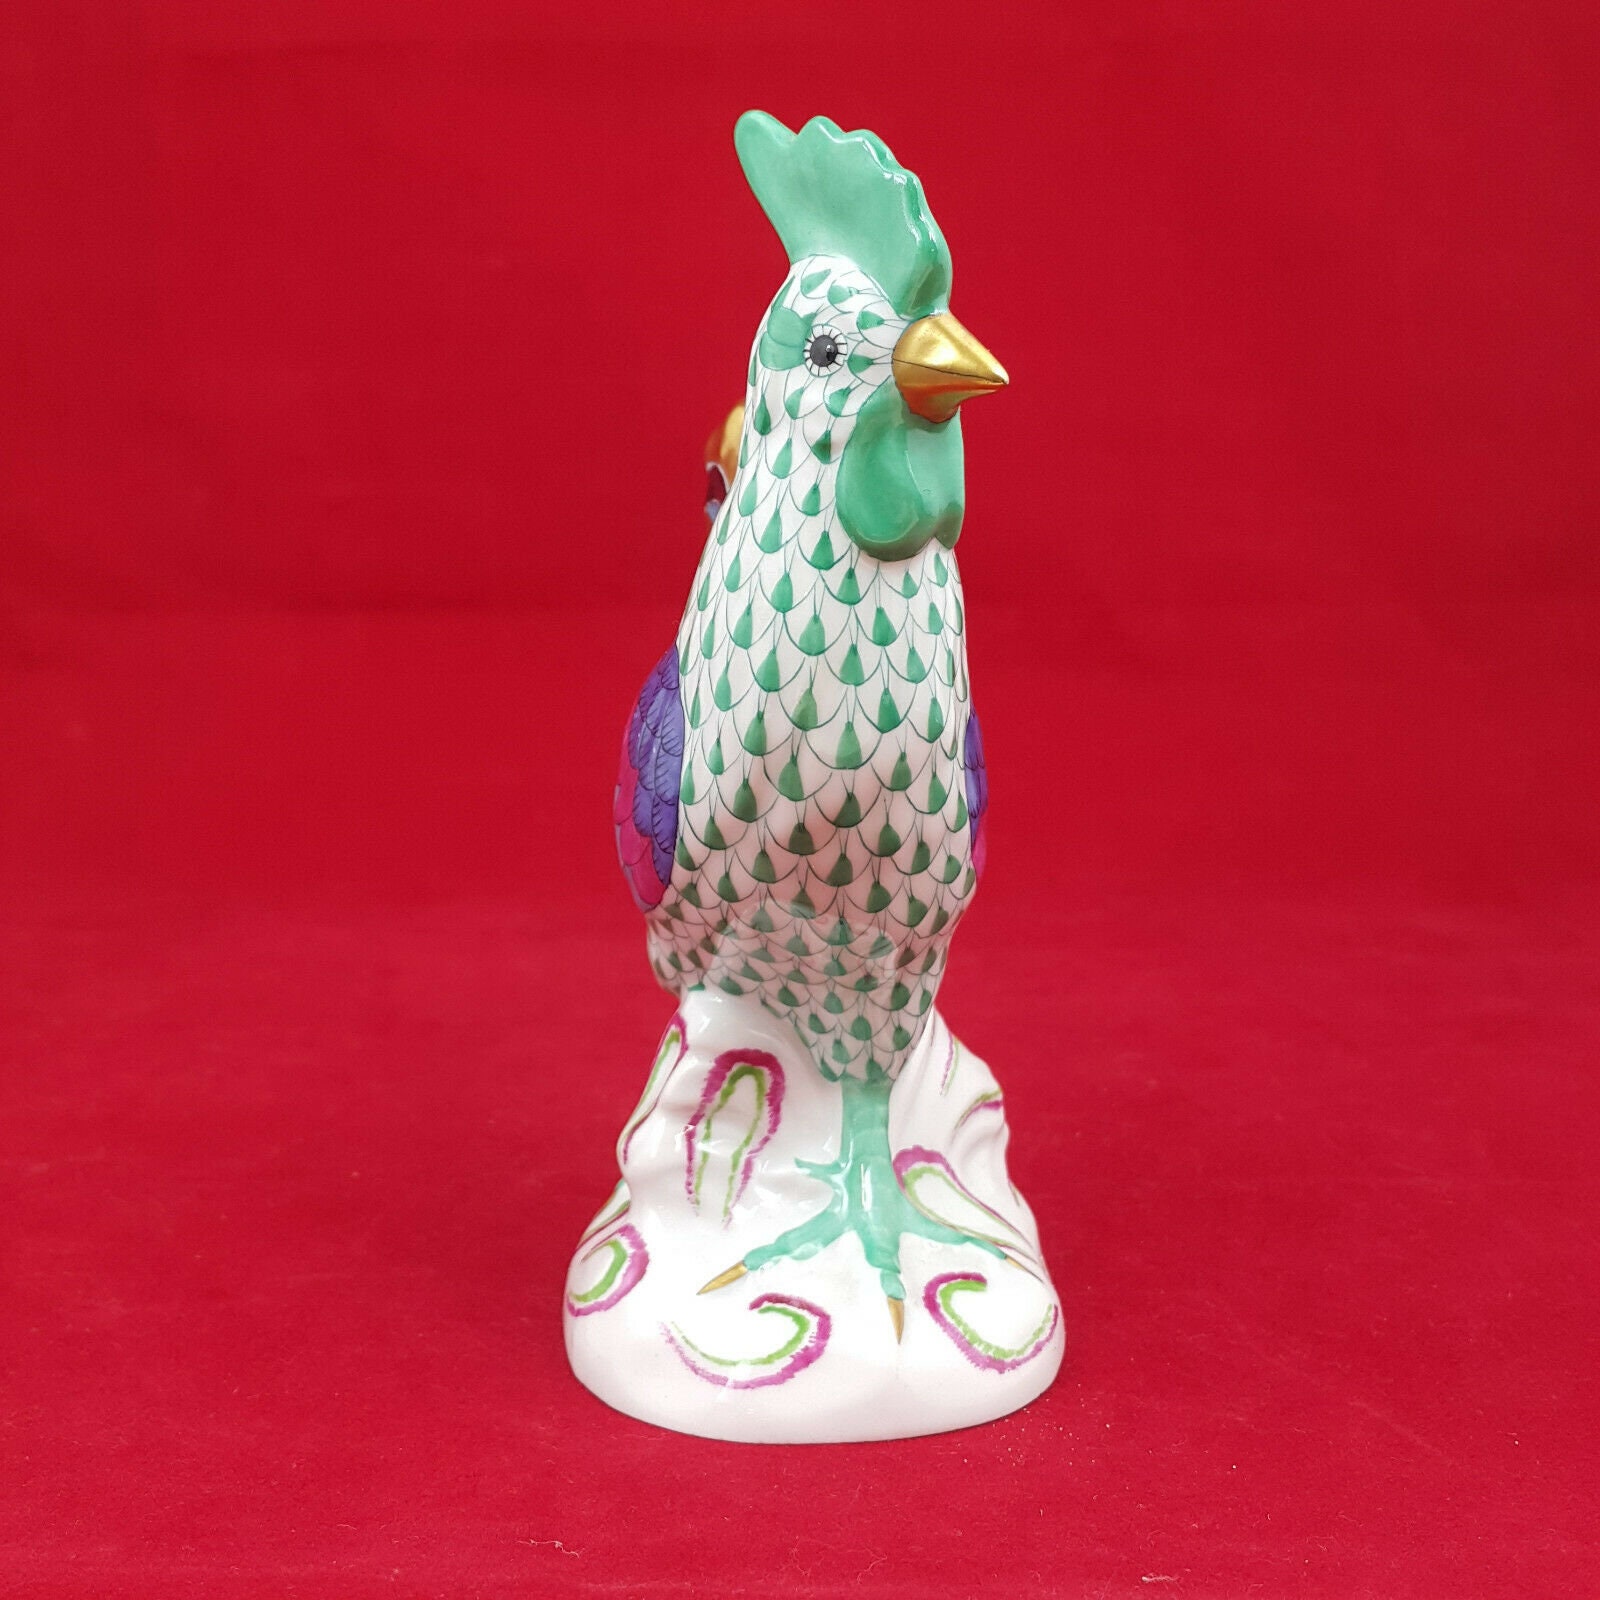 Herend Porcelain Rooster Figurine With Fishnet Pattern Green | Etsy